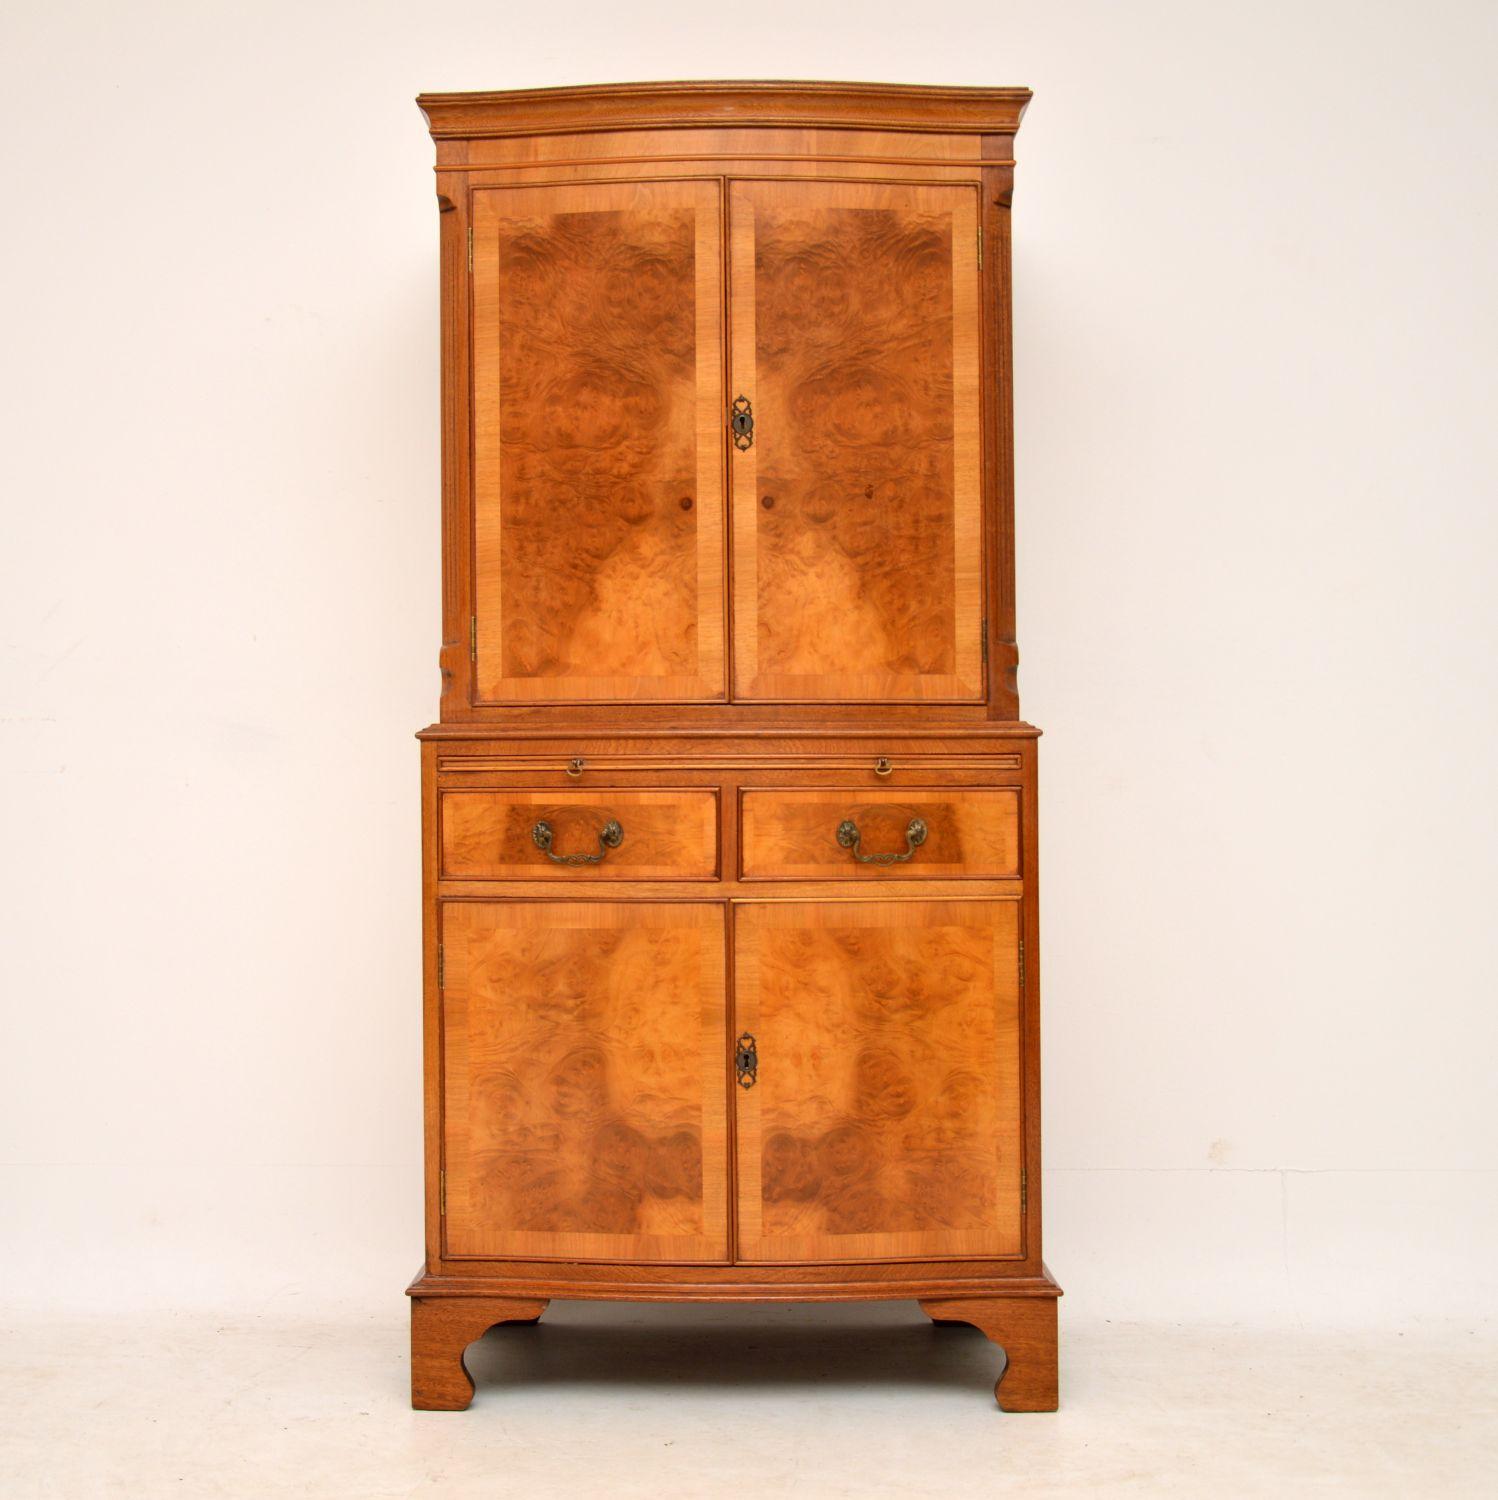 Antique burr walnut drinks cabinet in excellent condition and dating from circa 1930s period. It has a serpentine shaped front, with reeded canted corners on the top section and sits on bracket feet. The pale golden color and the pattern of the burr